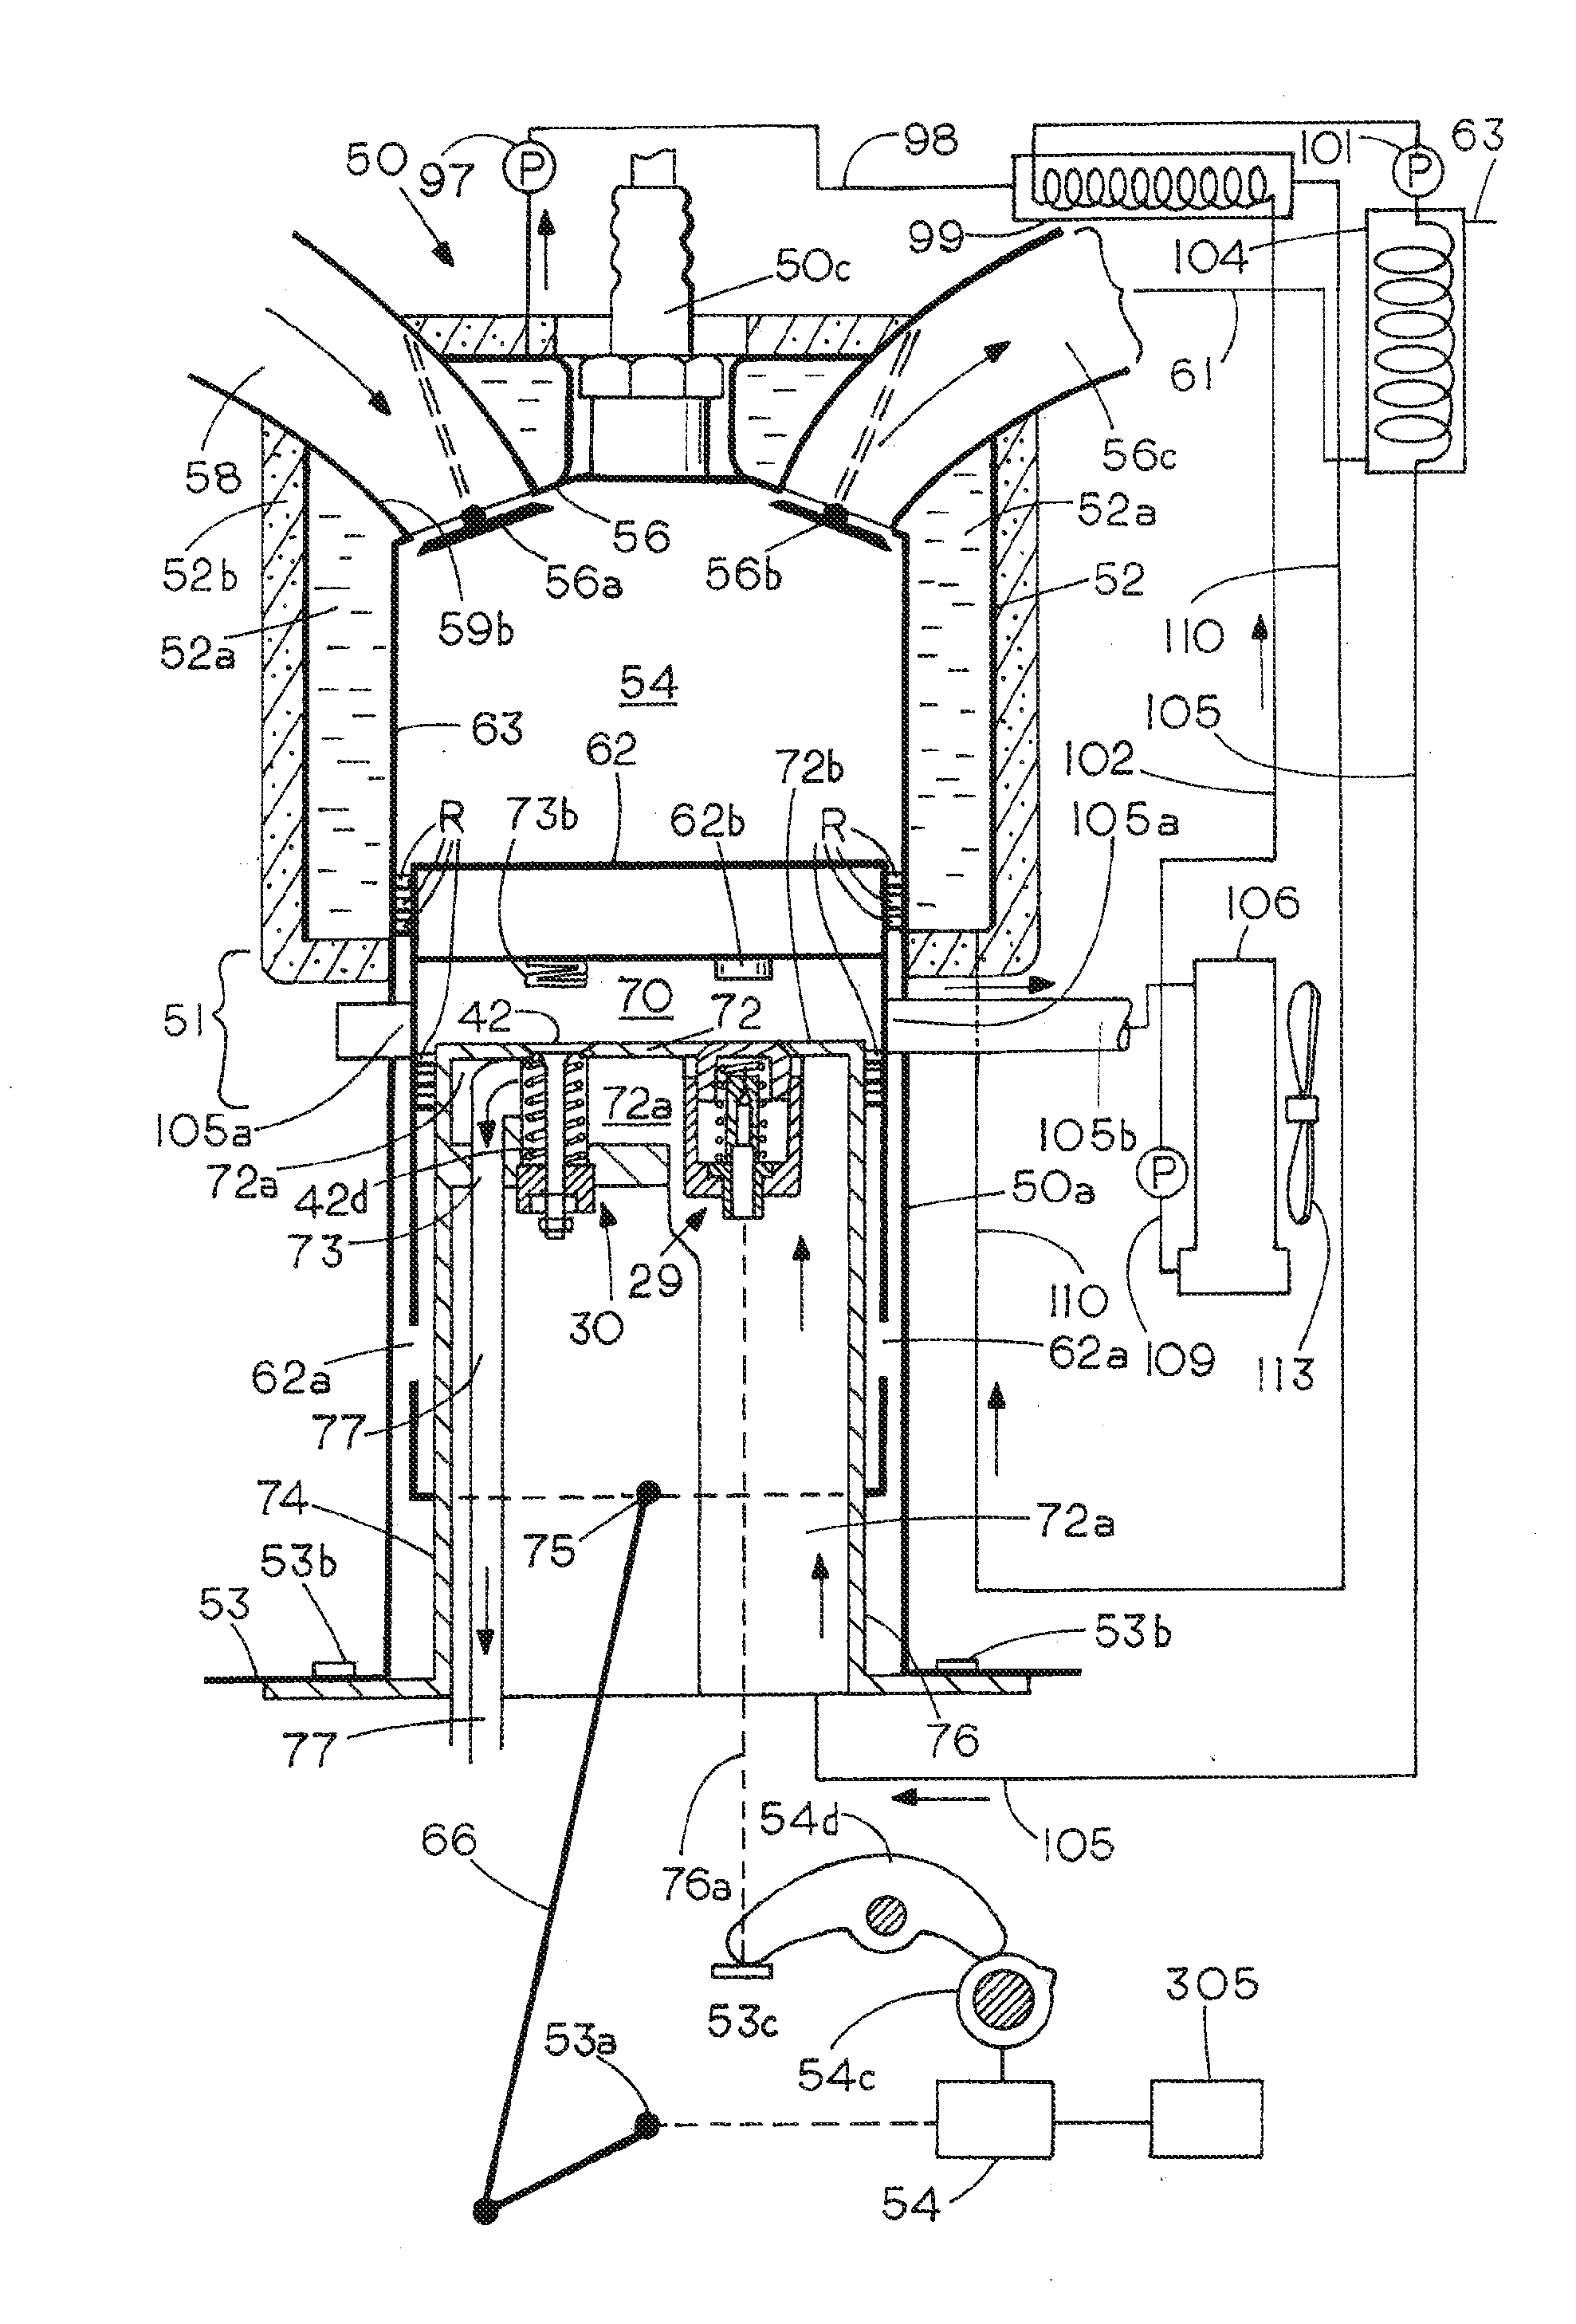 Method and Apparatus For Achieving Higher Thermal Efficiency In A Steam Engine or Steam Expander